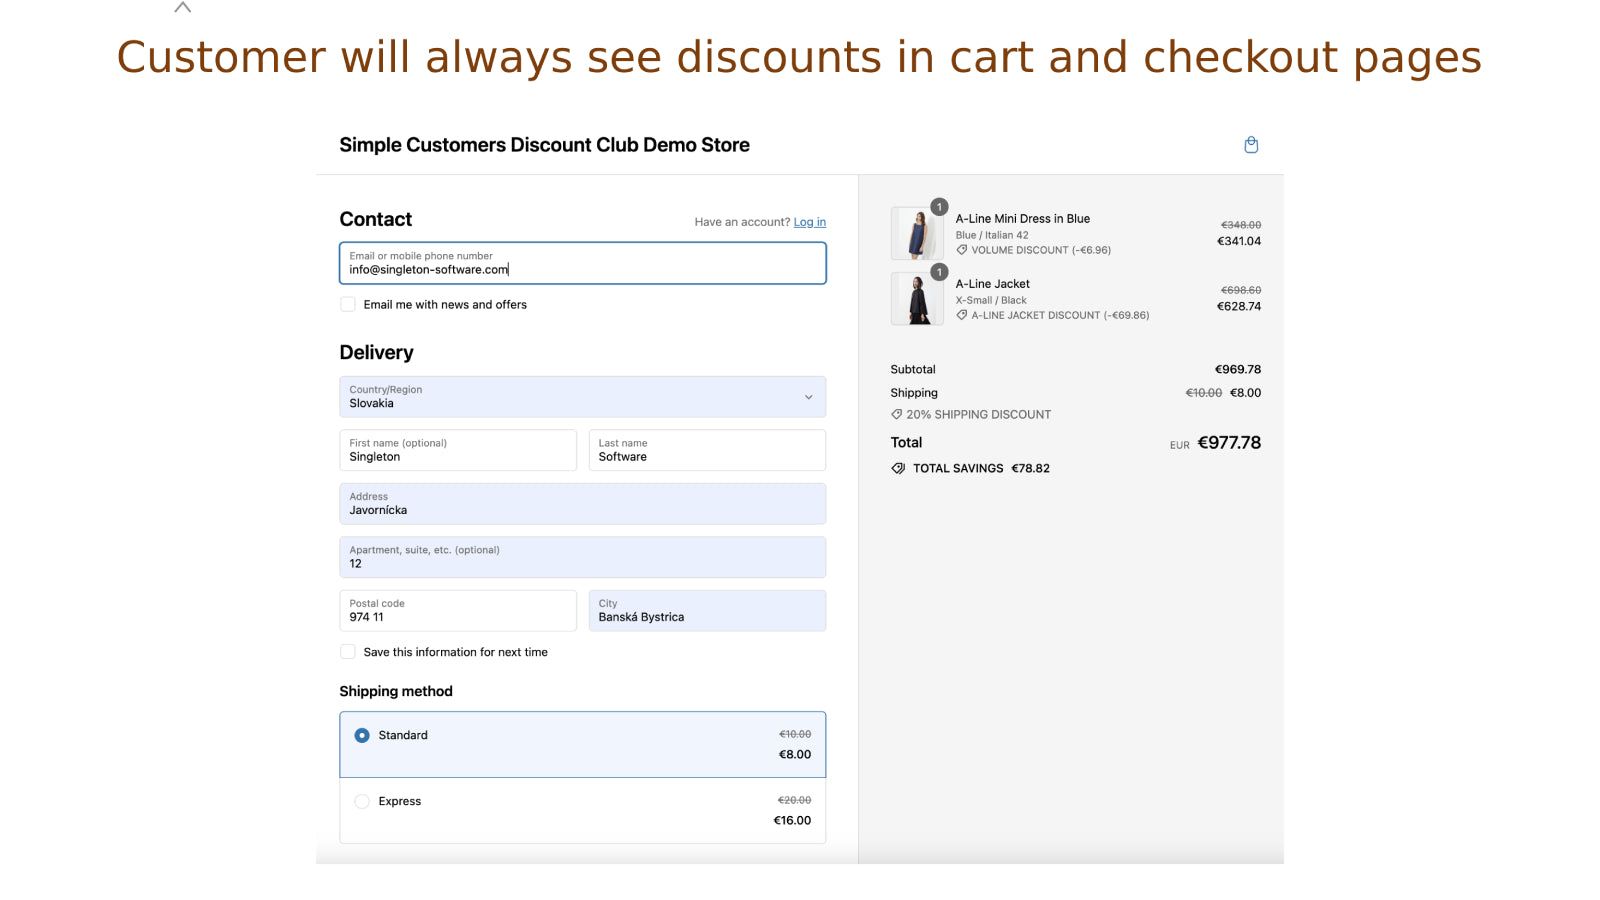 Customer will always see discount in cart and checkout pages